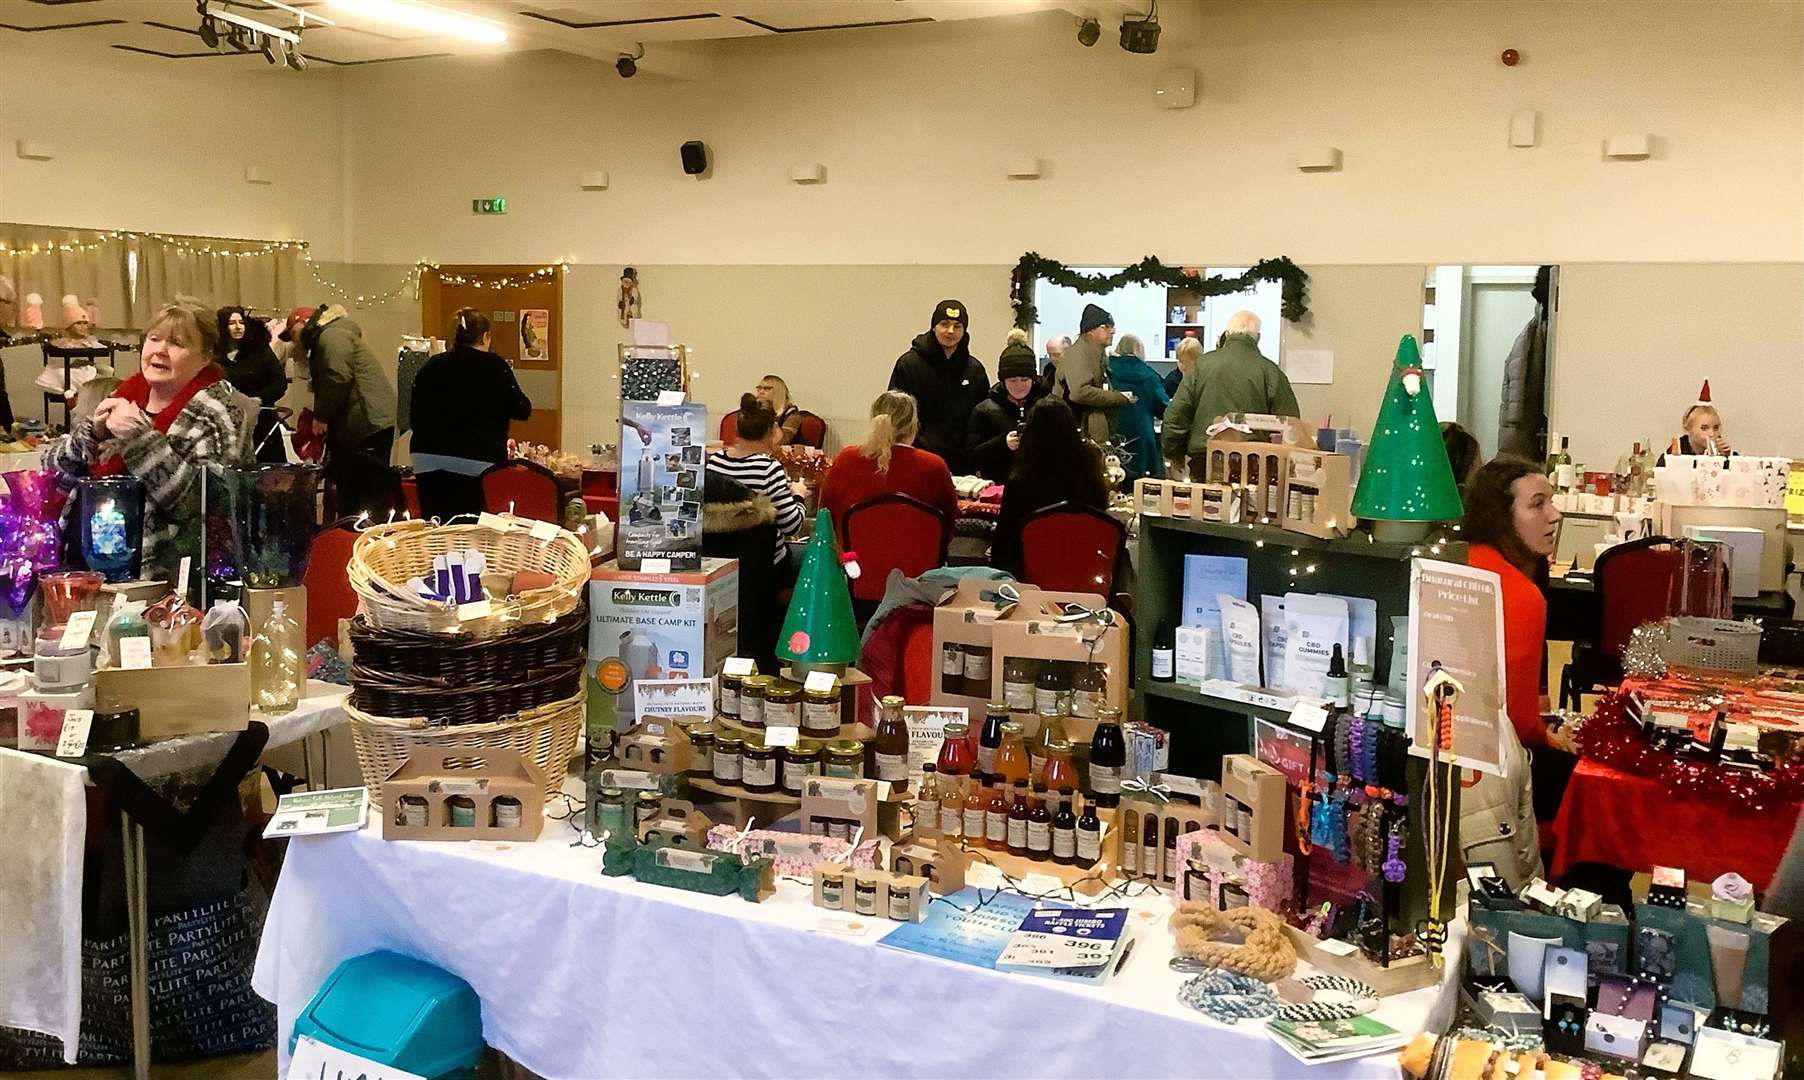 There were many items for sale on Saturday at the special event in the Legion's Thurso branch. Picture supplied